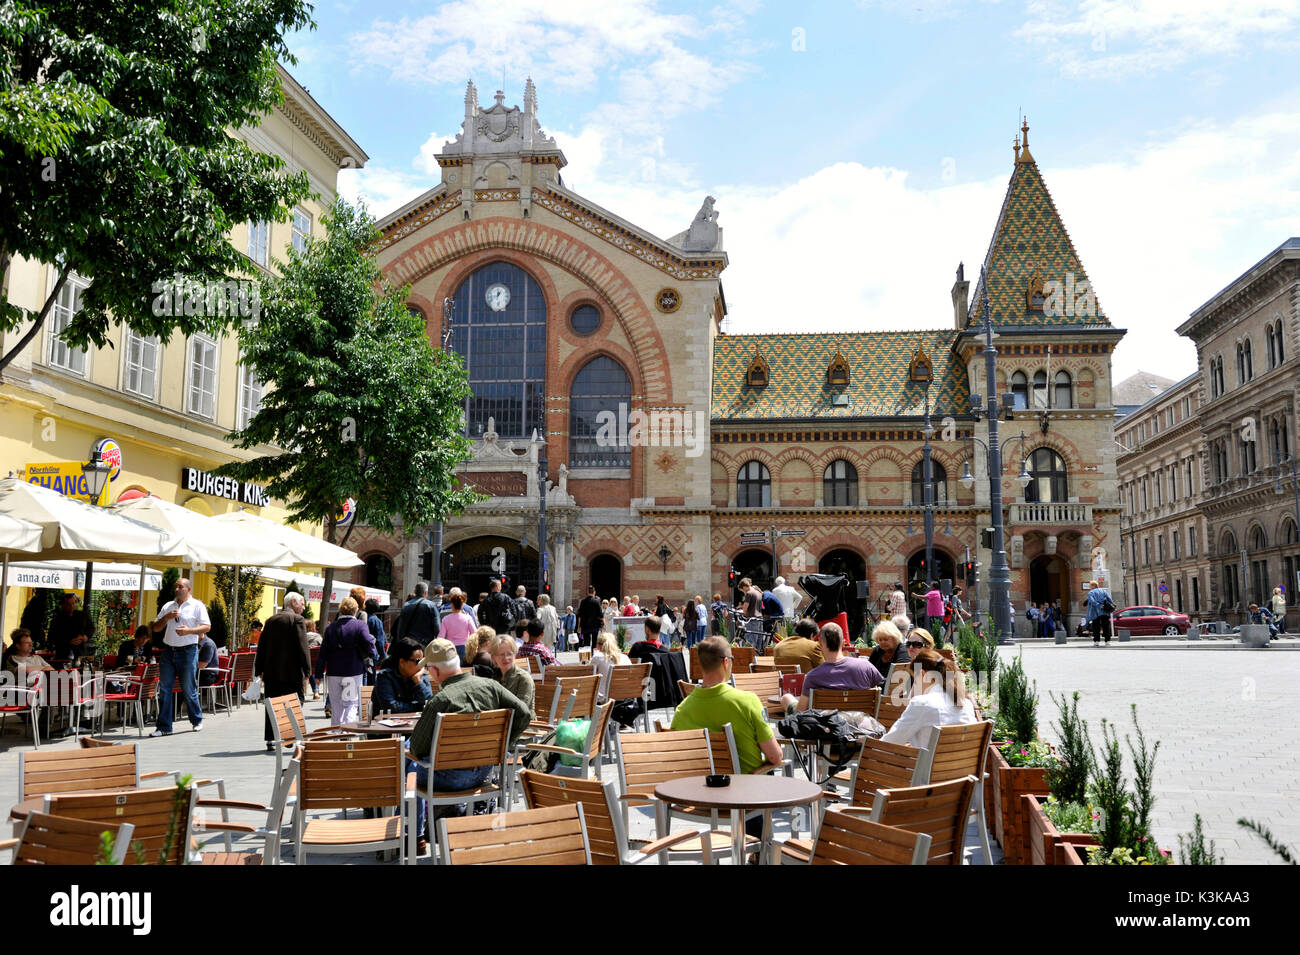 Hungary, Budapest, Pest district, central covered market designed by Samu Petz in 1896 Stock Photo